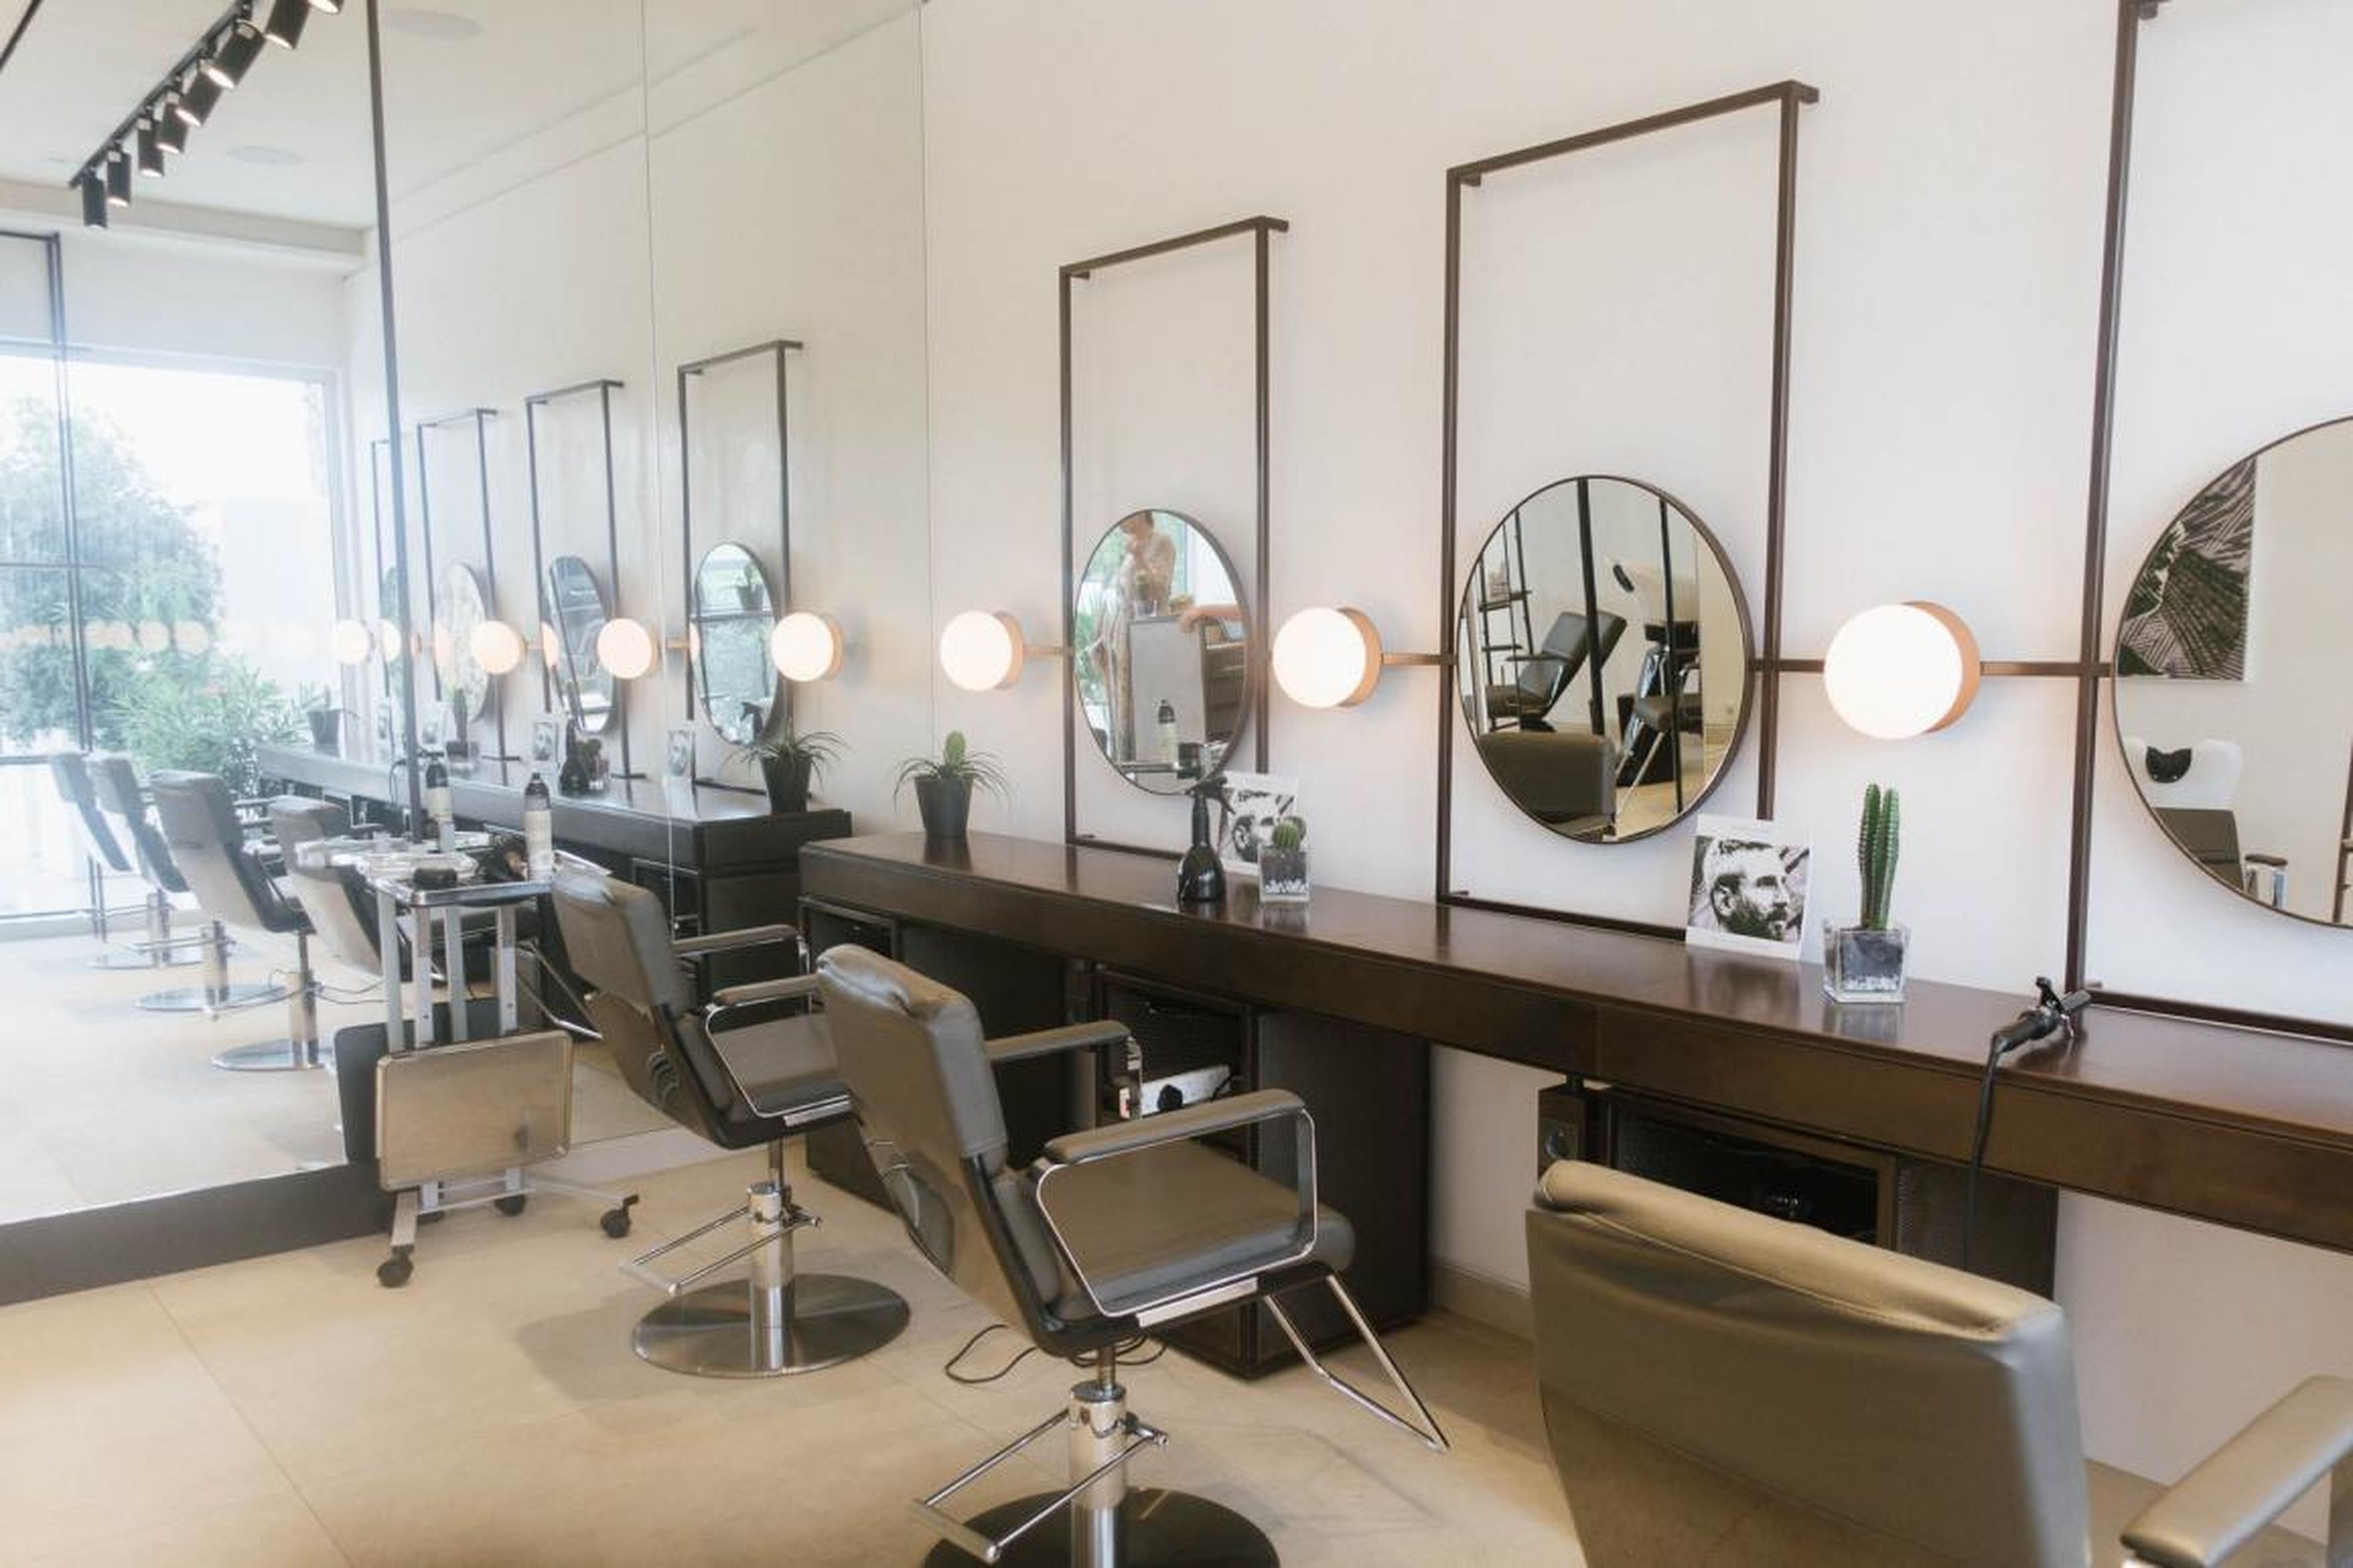 I usually stick to $15 haircuts at a barbershop, but I imagine the more pampered among us will be delighted that Nobu has an on-site John Frieda hair salon and nail bar.